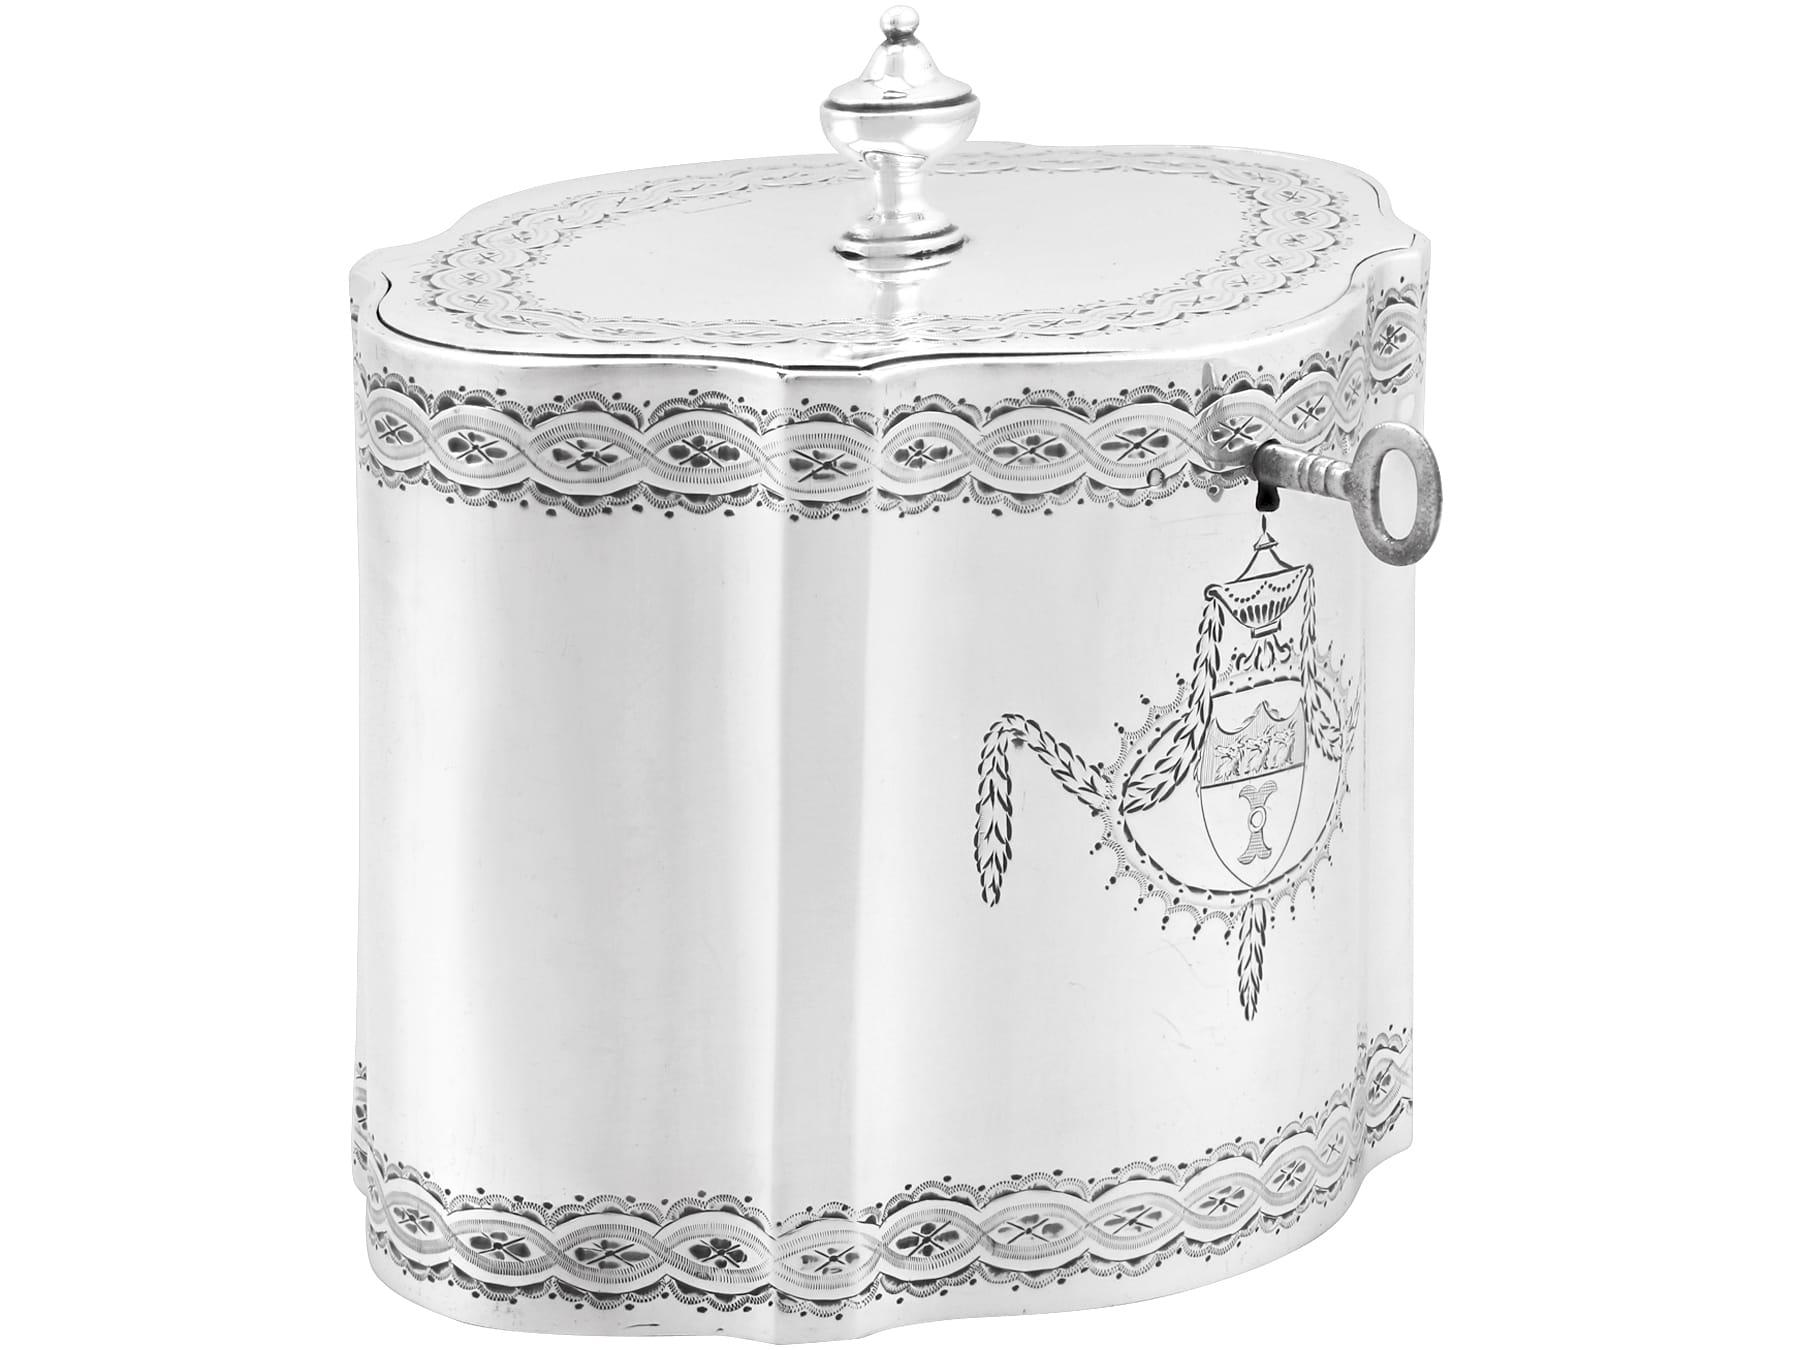 Antique 1782 Sterling Silver Locking Tea Caddy In Excellent Condition For Sale In Jesmond, Newcastle Upon Tyne